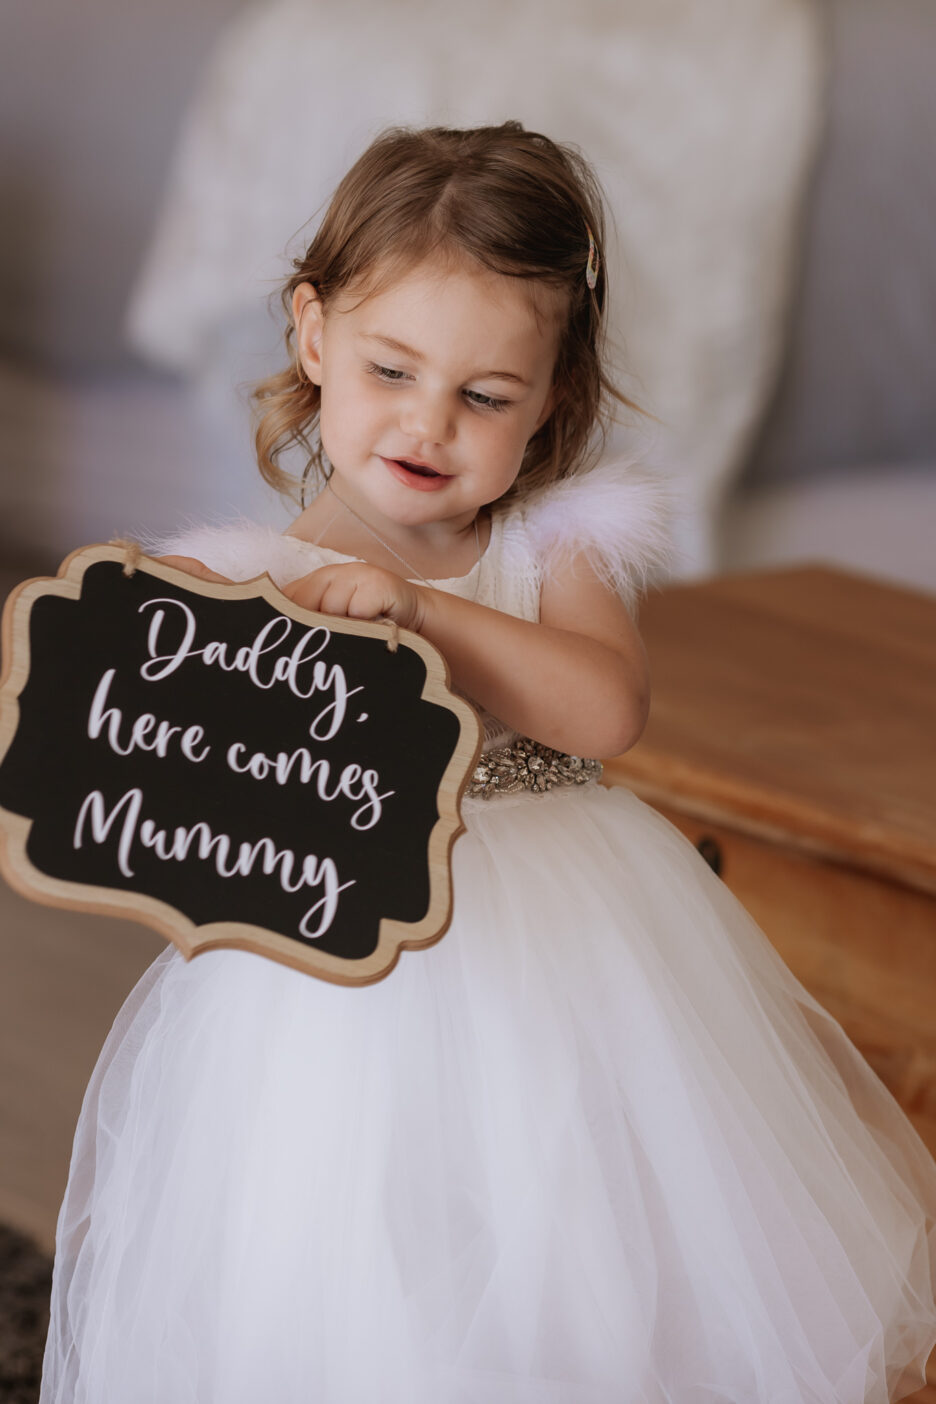 Flowergirl with Daddy here comes Mummy sign